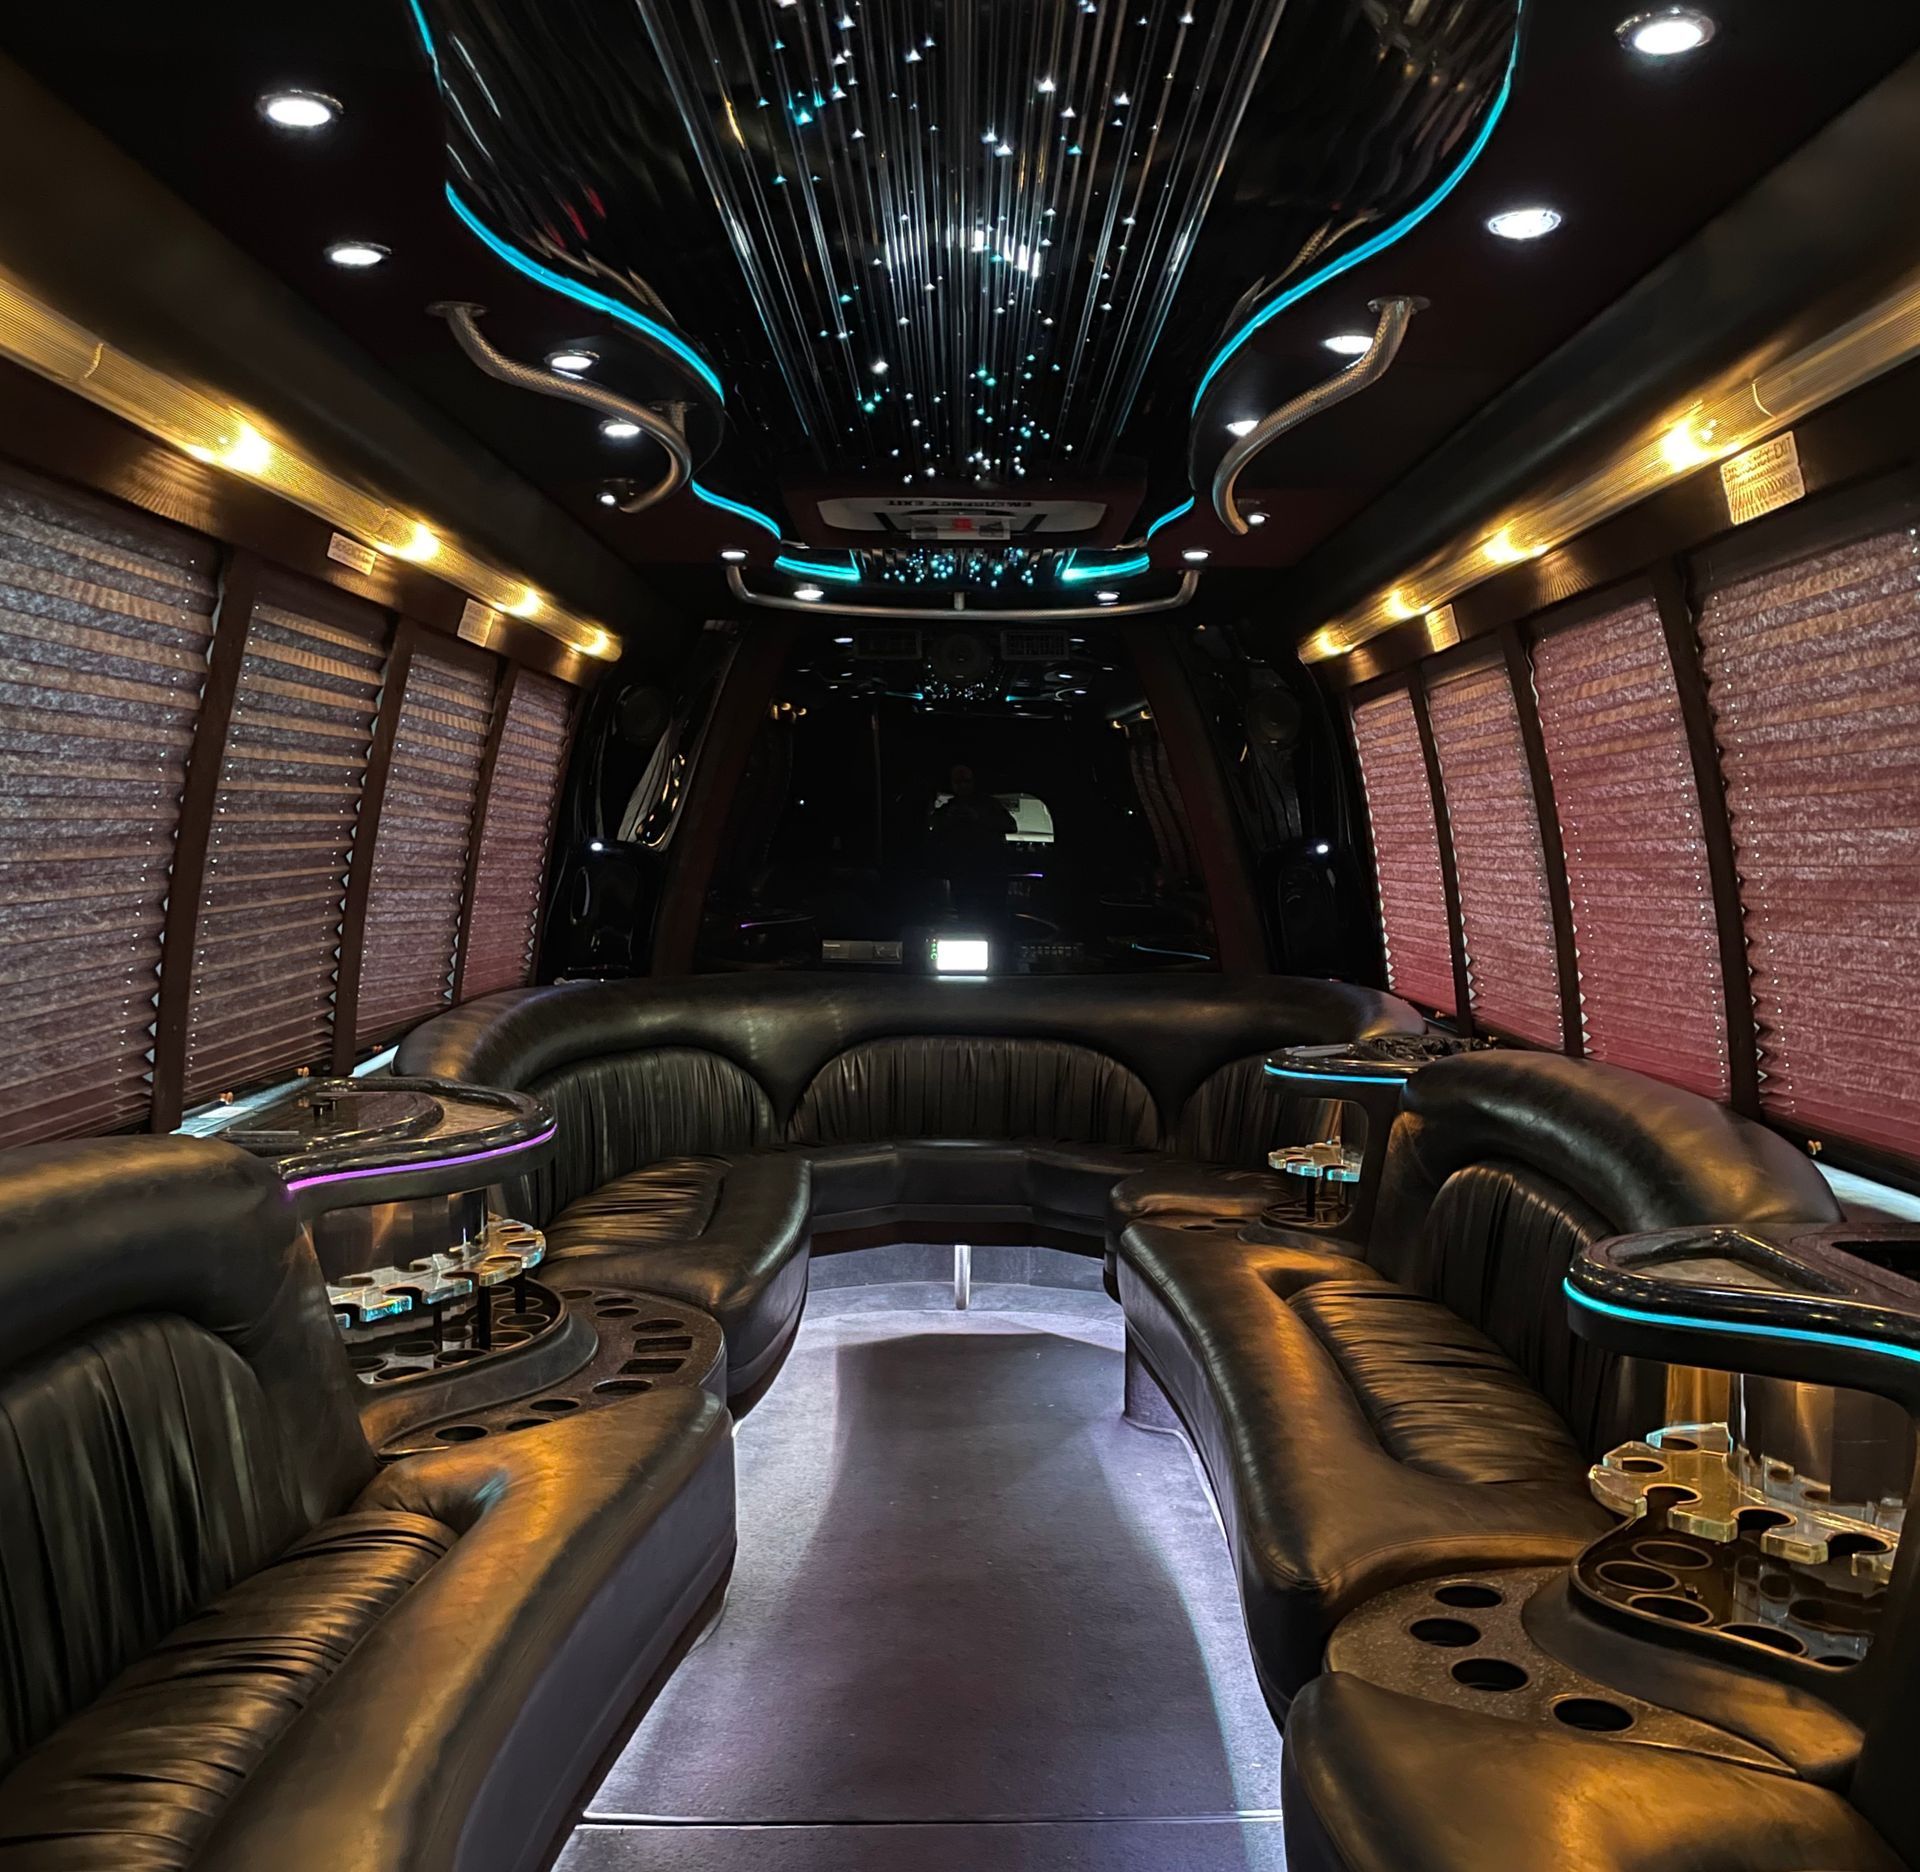 the inside of the Krystal Coach 24 passenger limousine with starry ceiling lights